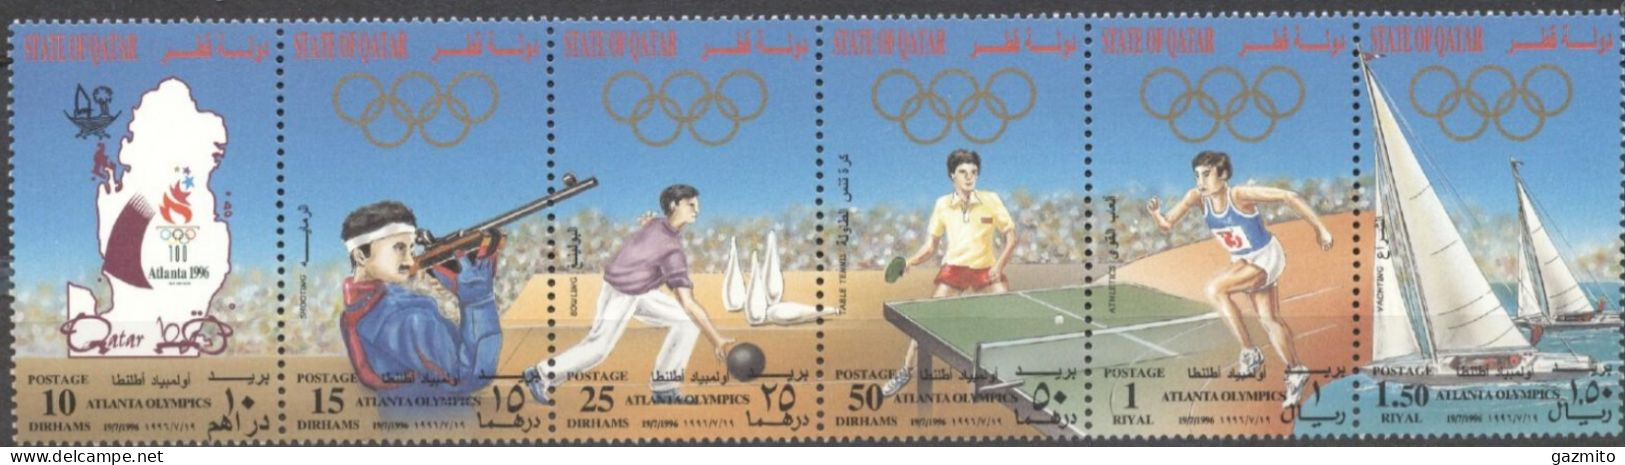 Quatar 1996, Olympic Games In Atlanta, Shooting, Bowling, Tennis Table, Athletic, Shipping, 6val - Shooting (Weapons)